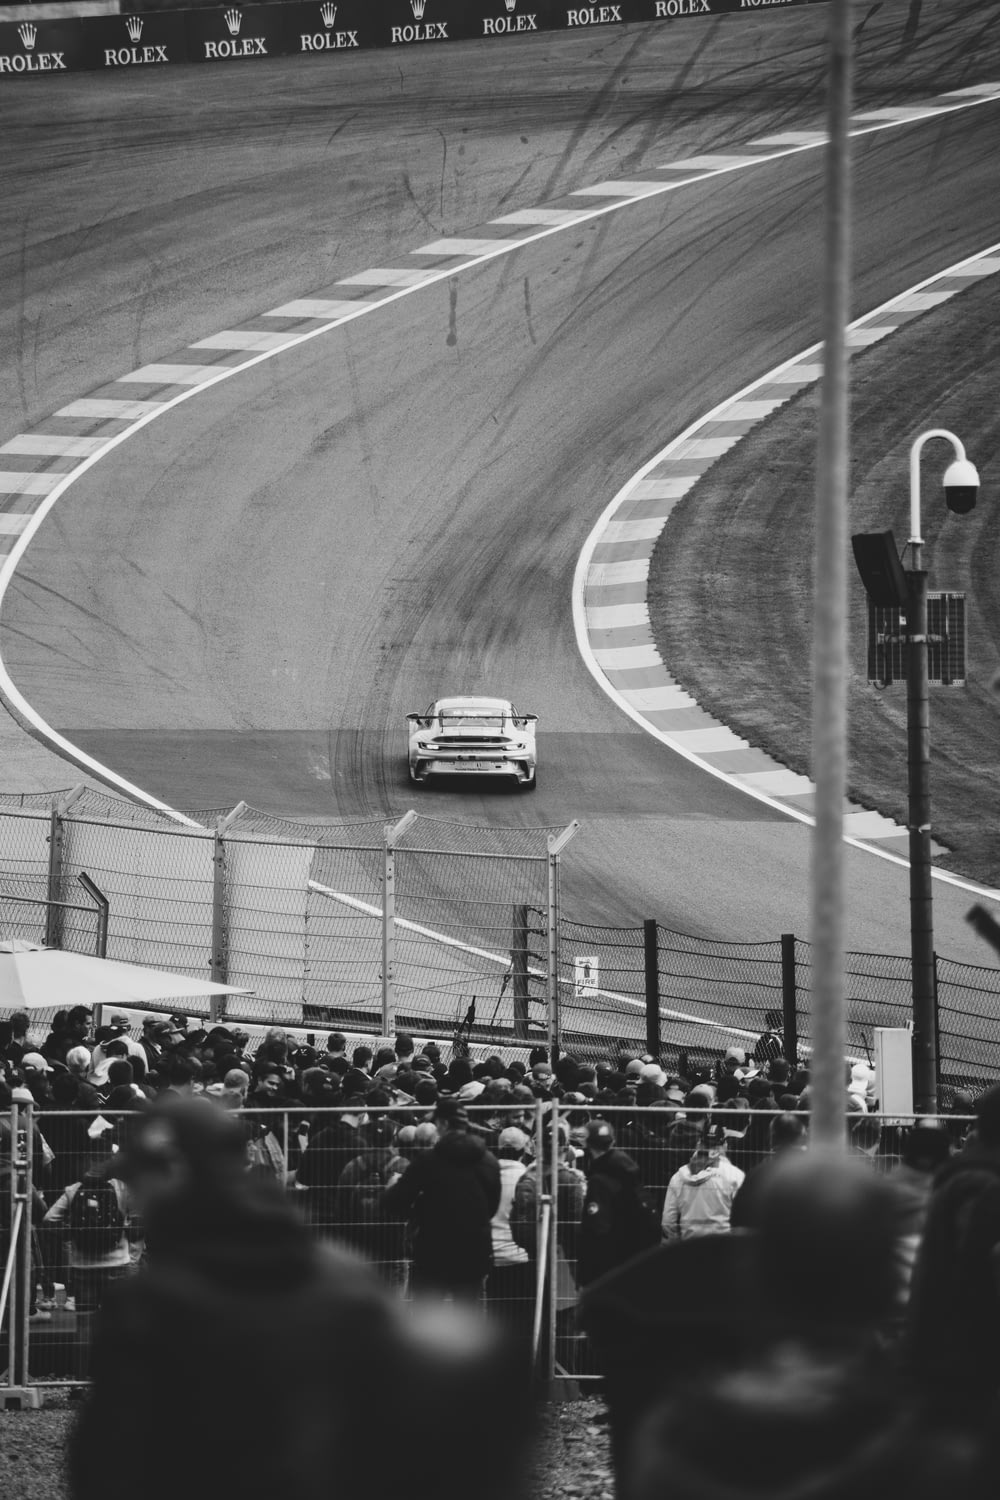 grayscale photo of people on race track